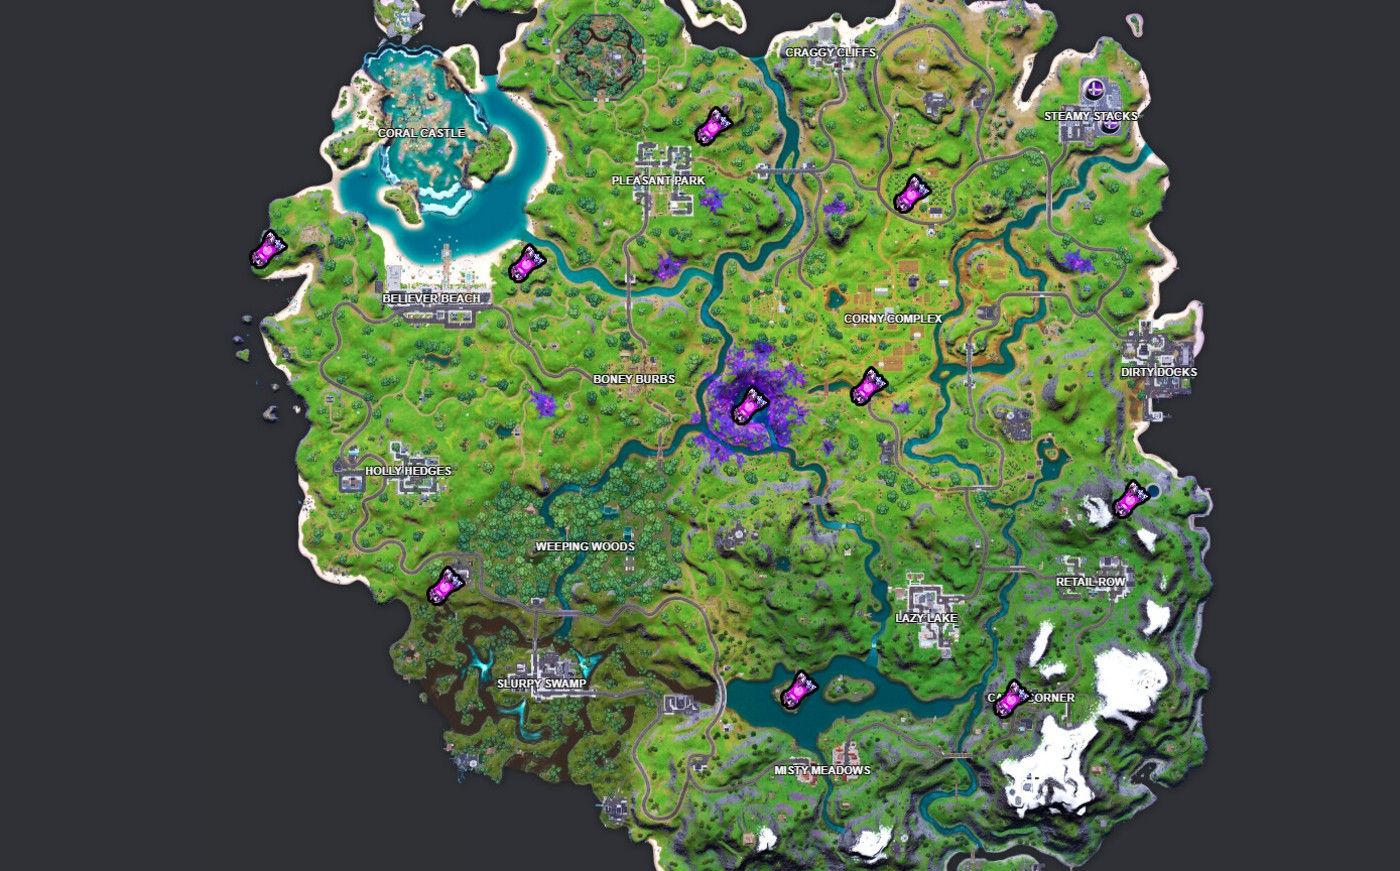 Locations for Alien Artifacts in Fortnite Season 7 for Week 1 and Week 2